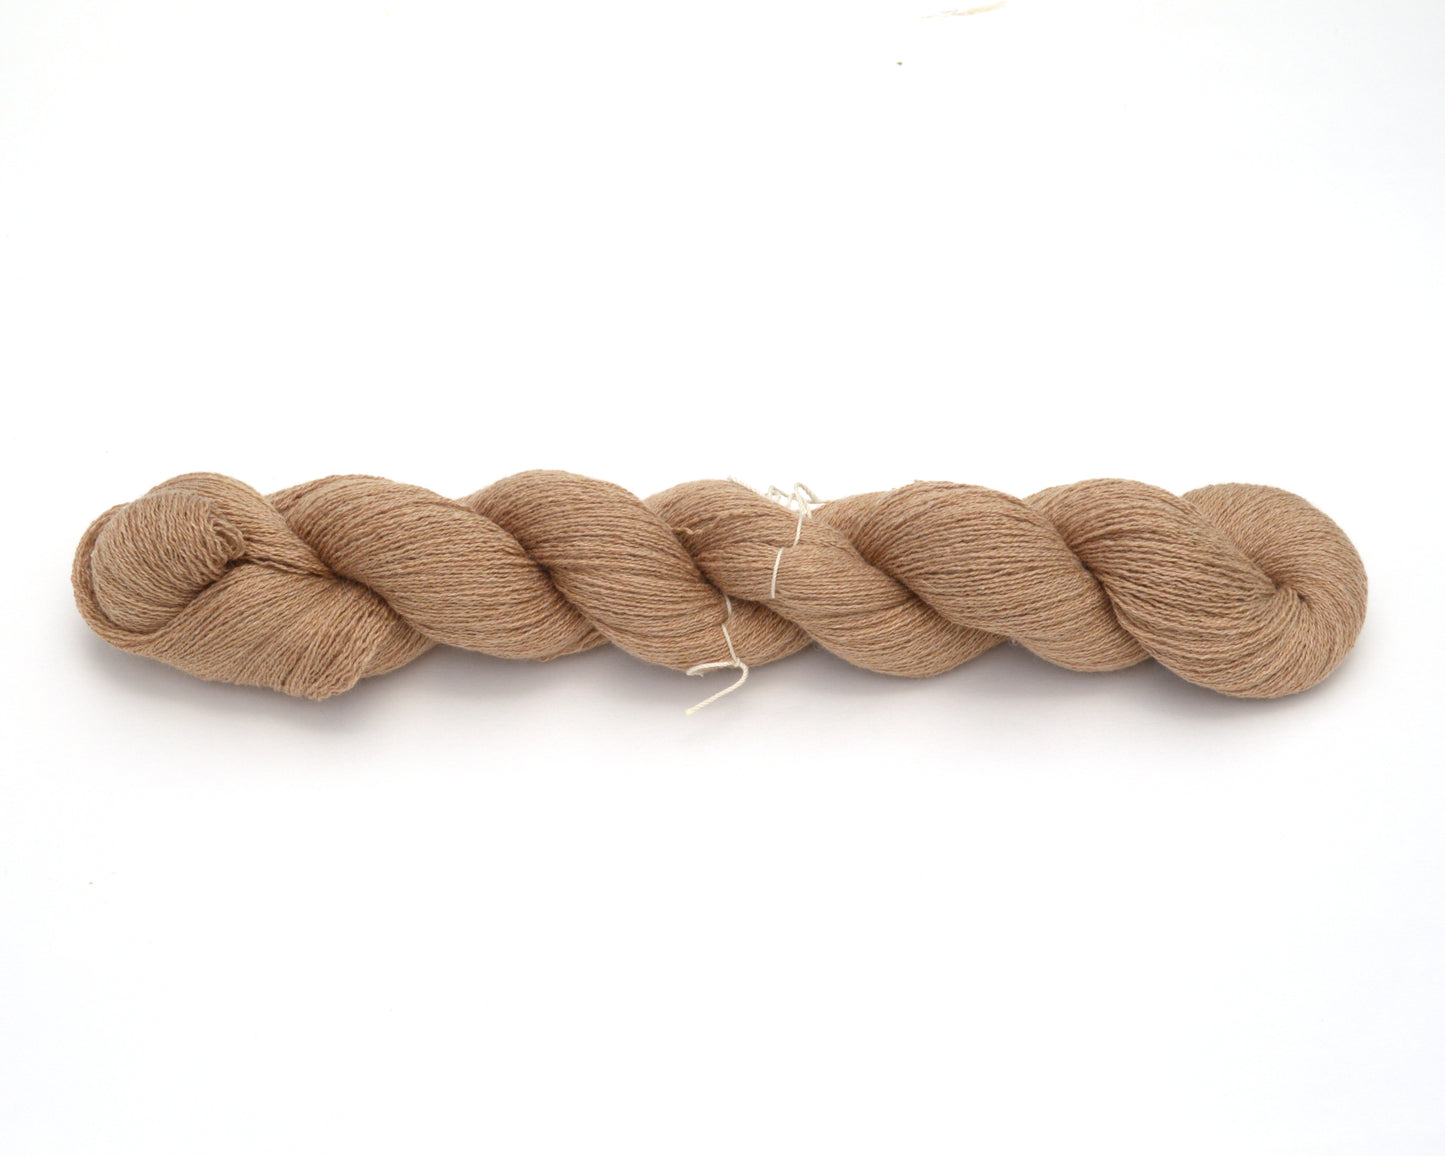 Lace Weight Recycled Silk Cashmere Yarn in Tan